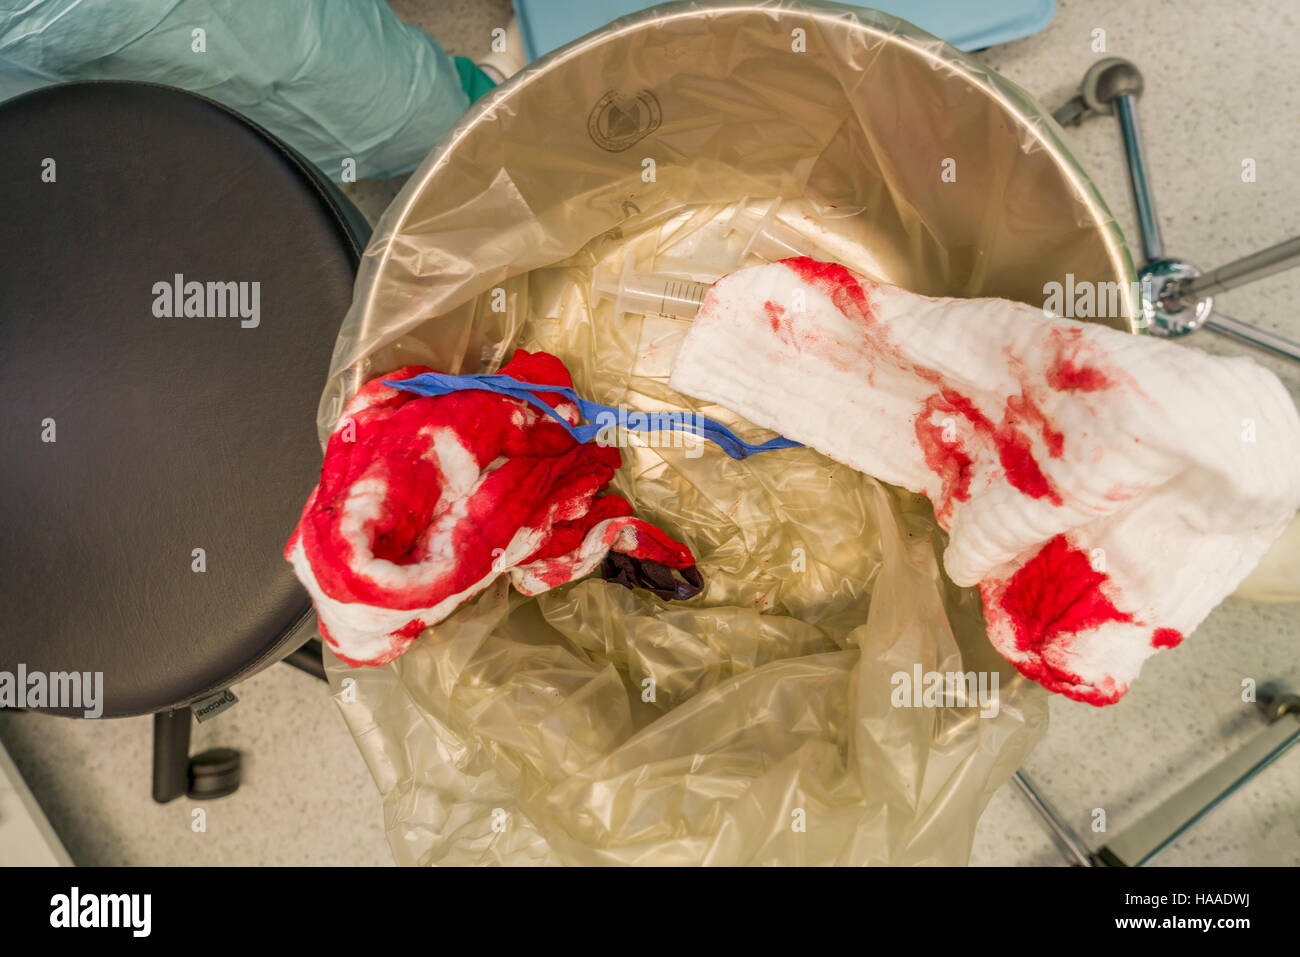 Blood on surgical sponges. Heart valve replacement surgery, operating room, Reykjavik, Iceland. Stock Photo